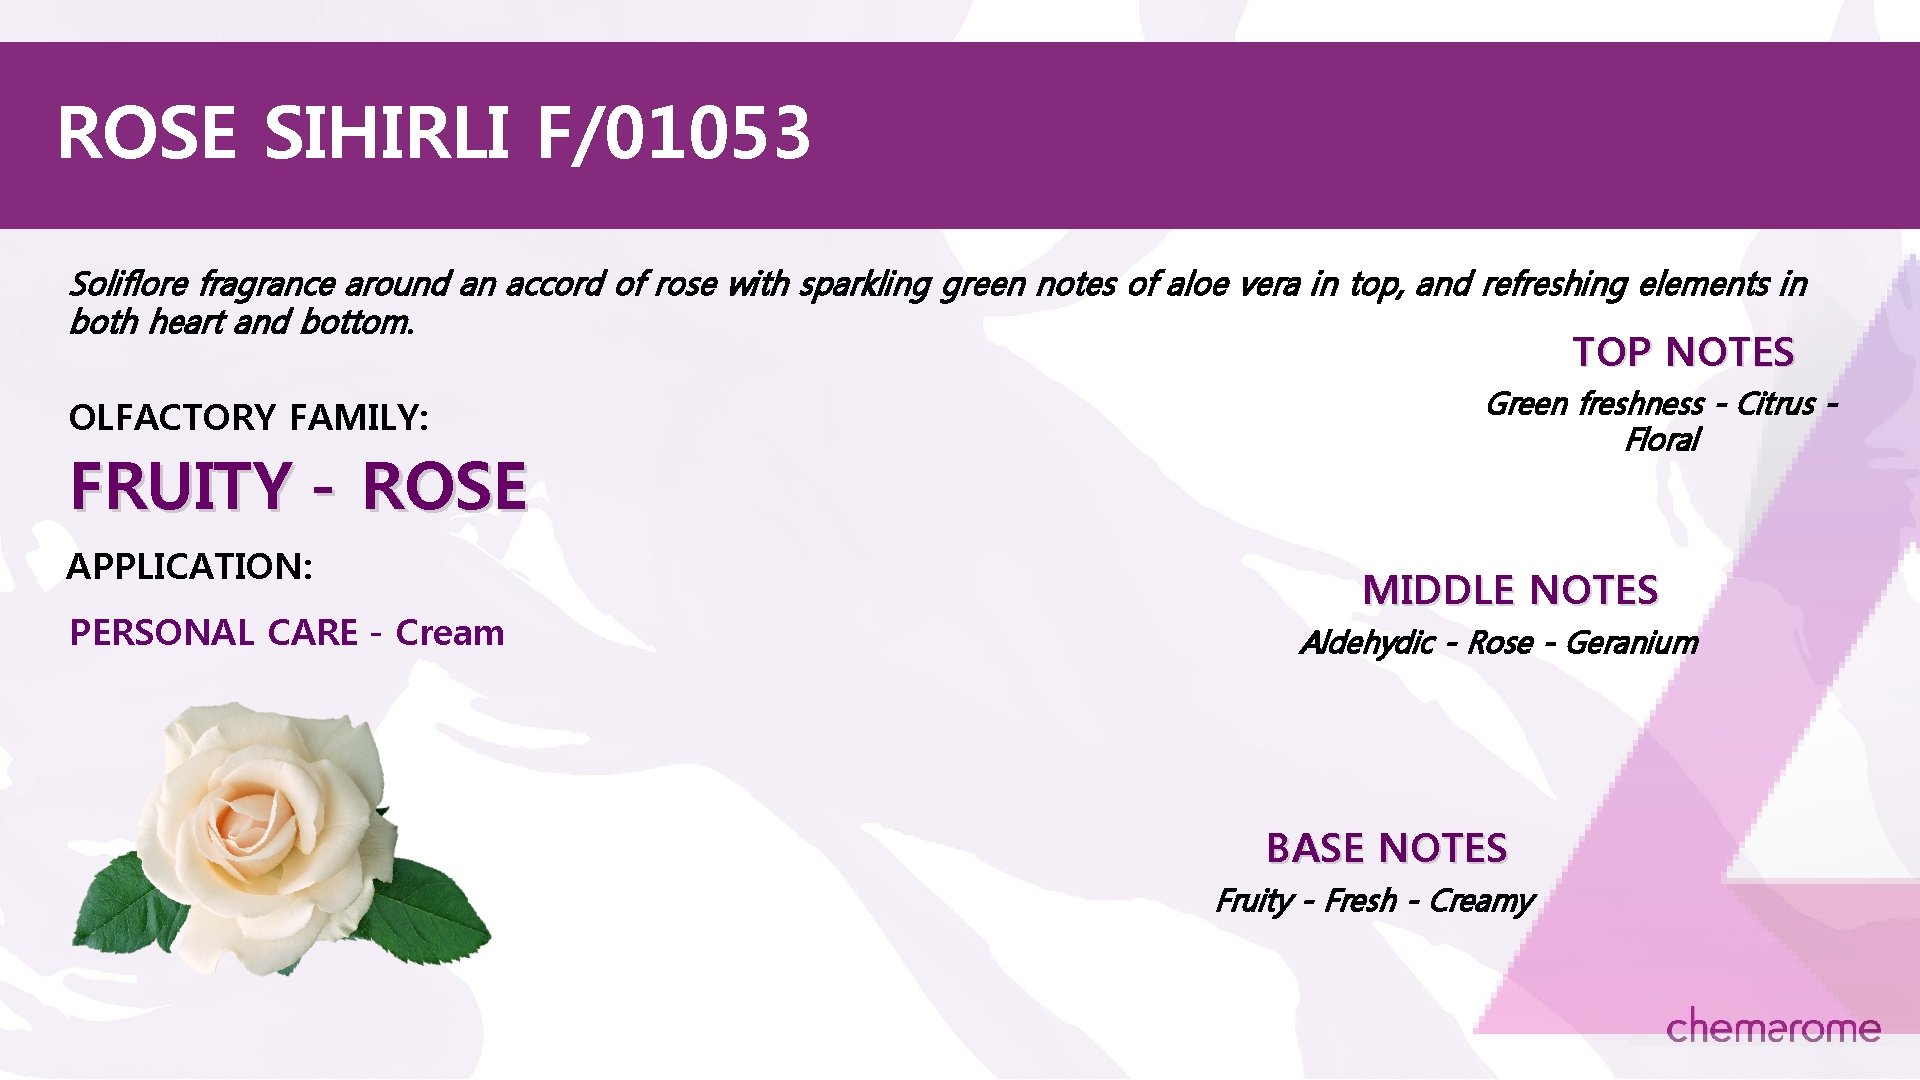 ROSE SIHIRLI F/01053 Soliflore fragrance around an accord of rose with sparkling green notes